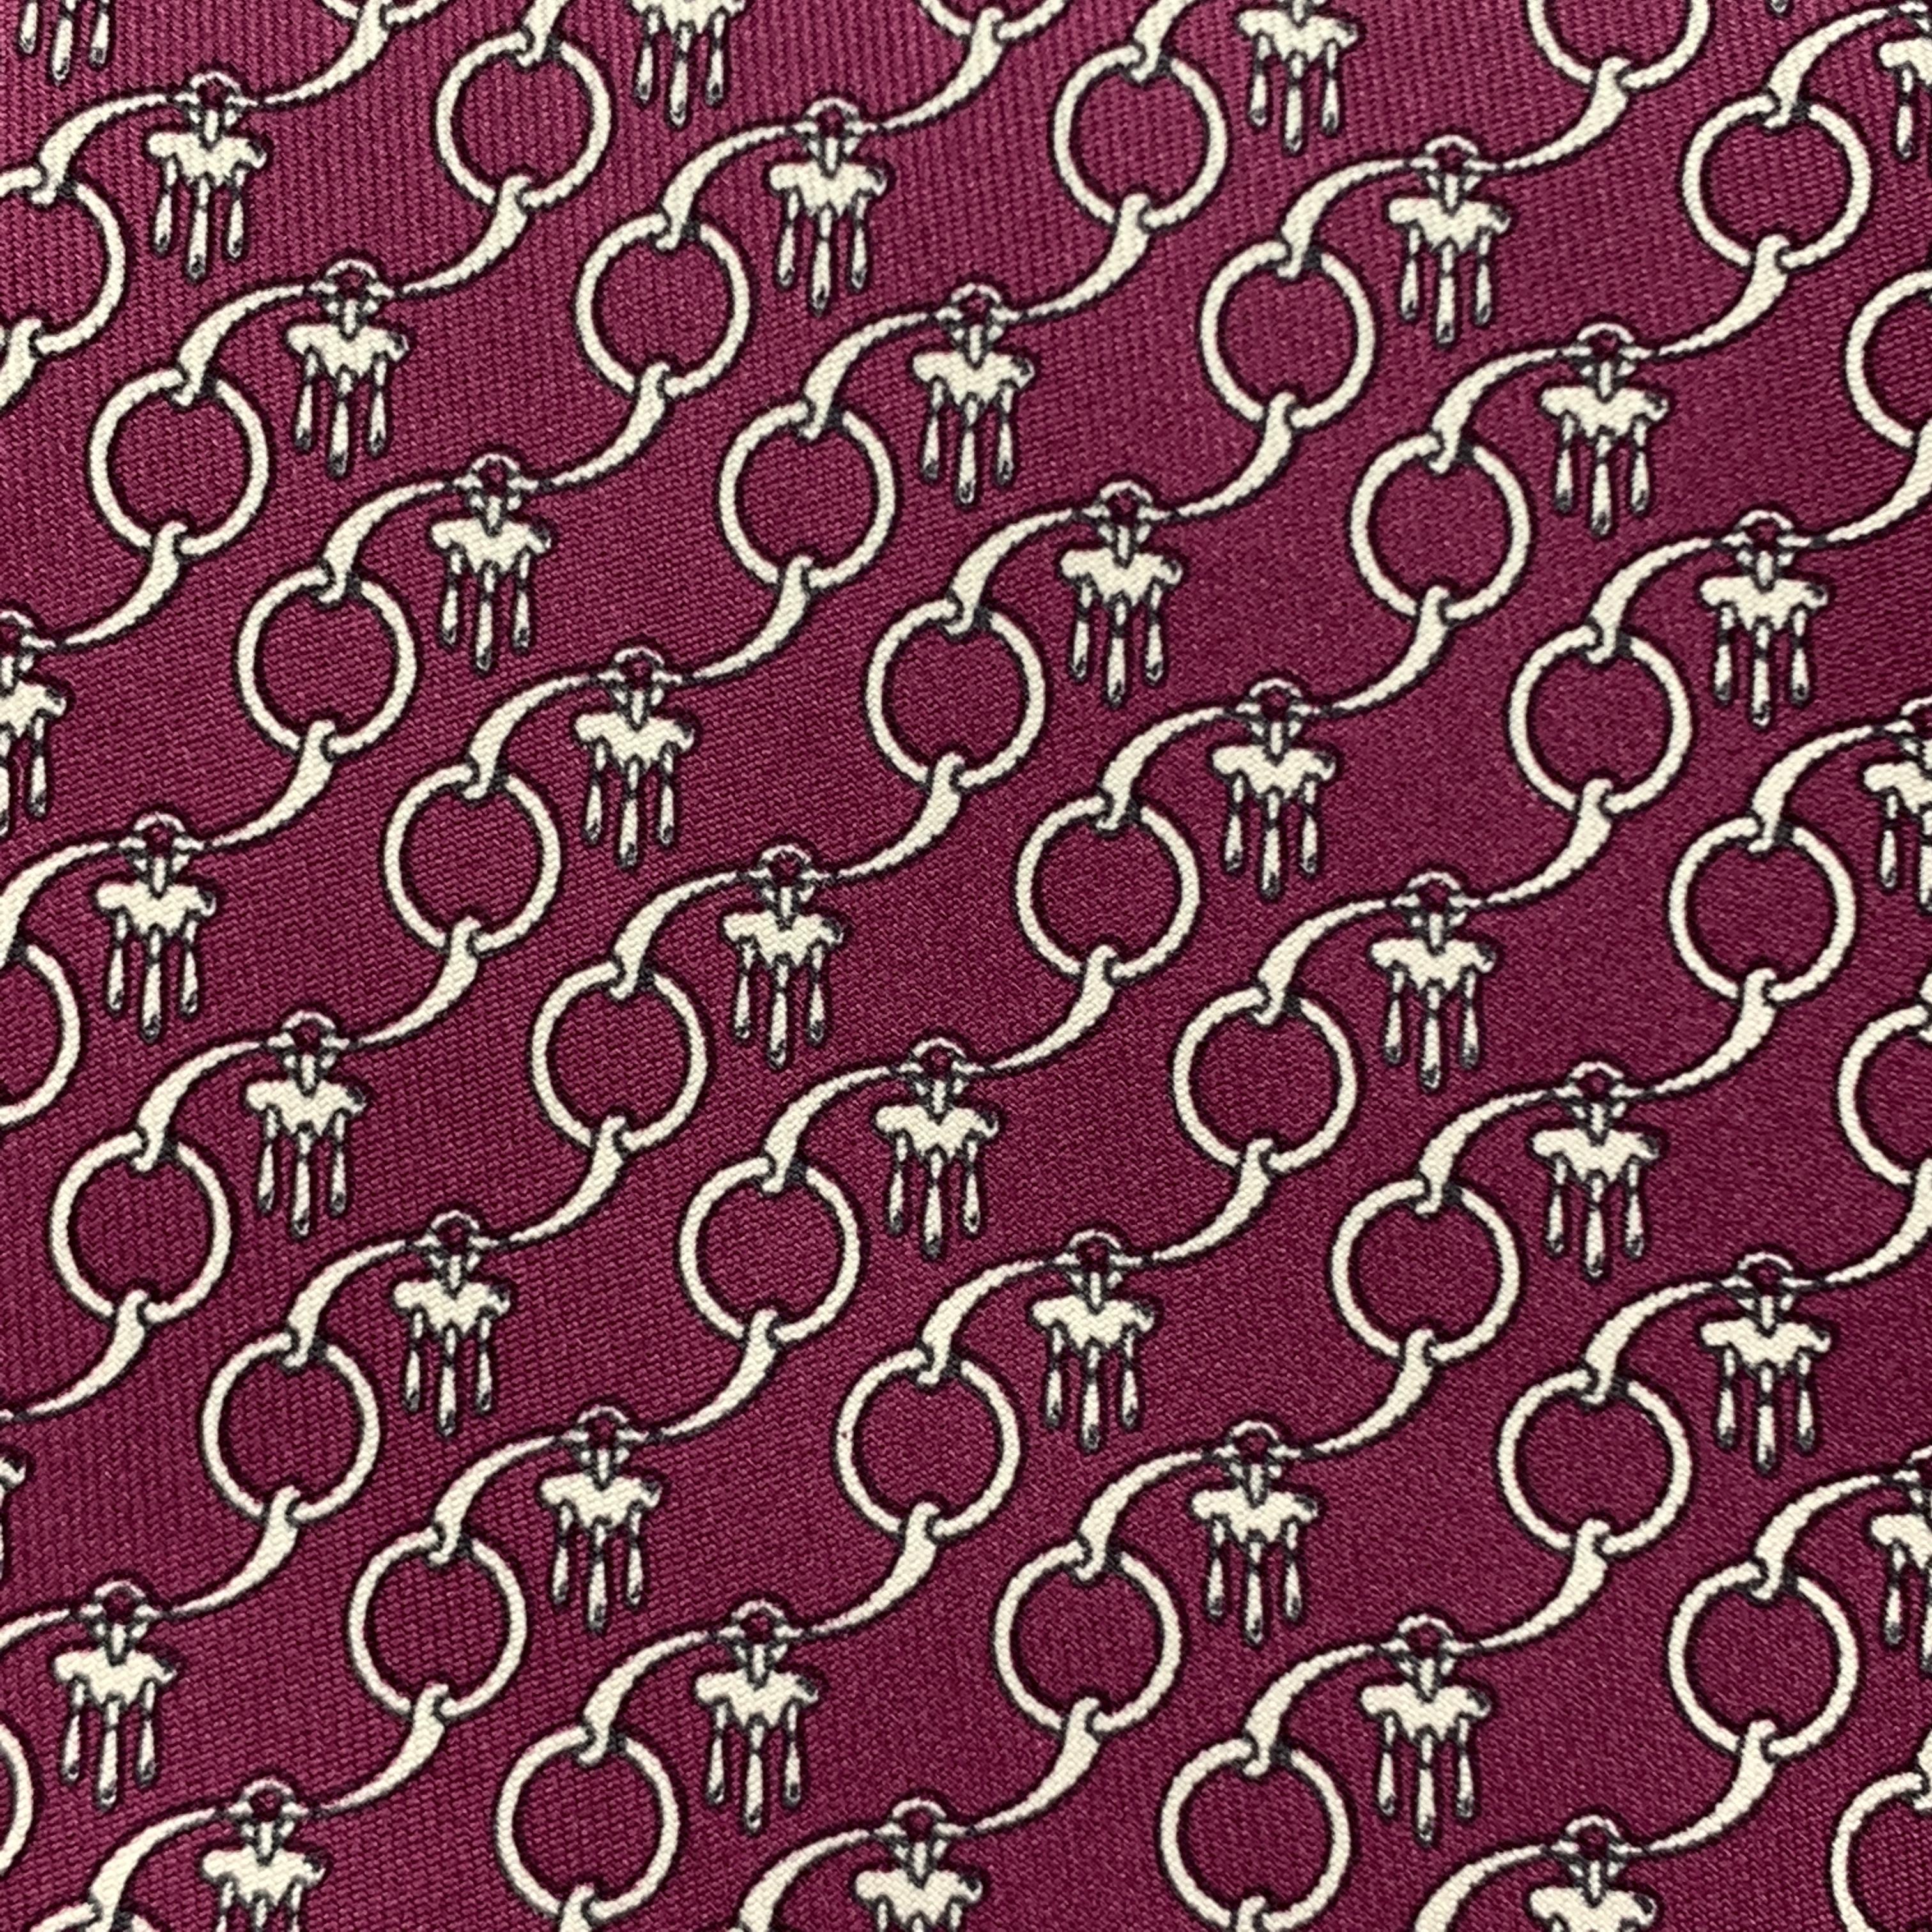 HERMES necktie comes in raspberry burgundy silk twill with all over beige interlock geometric tassels print. Made in France.

Excellent Pre-Owned Condition.

Width: 3.5 in. 